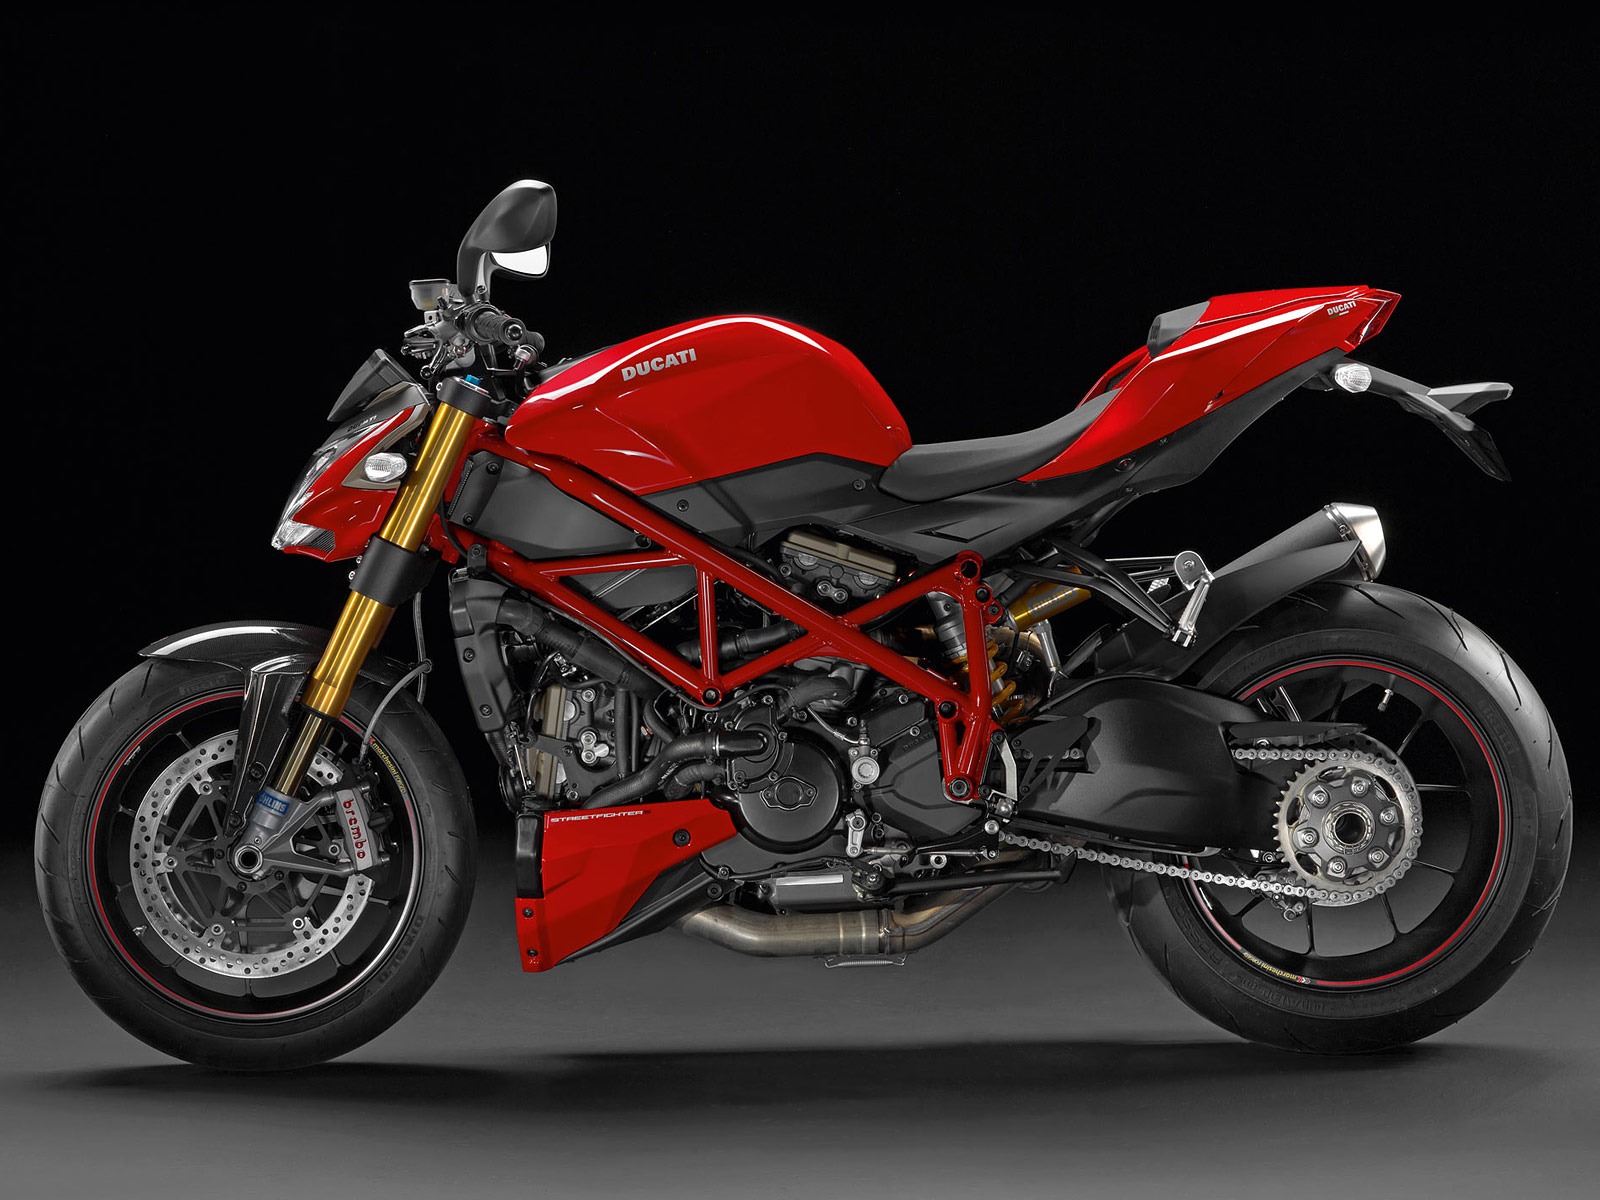 2013 Streetfighter S Ducati motorcycle photos, specifications